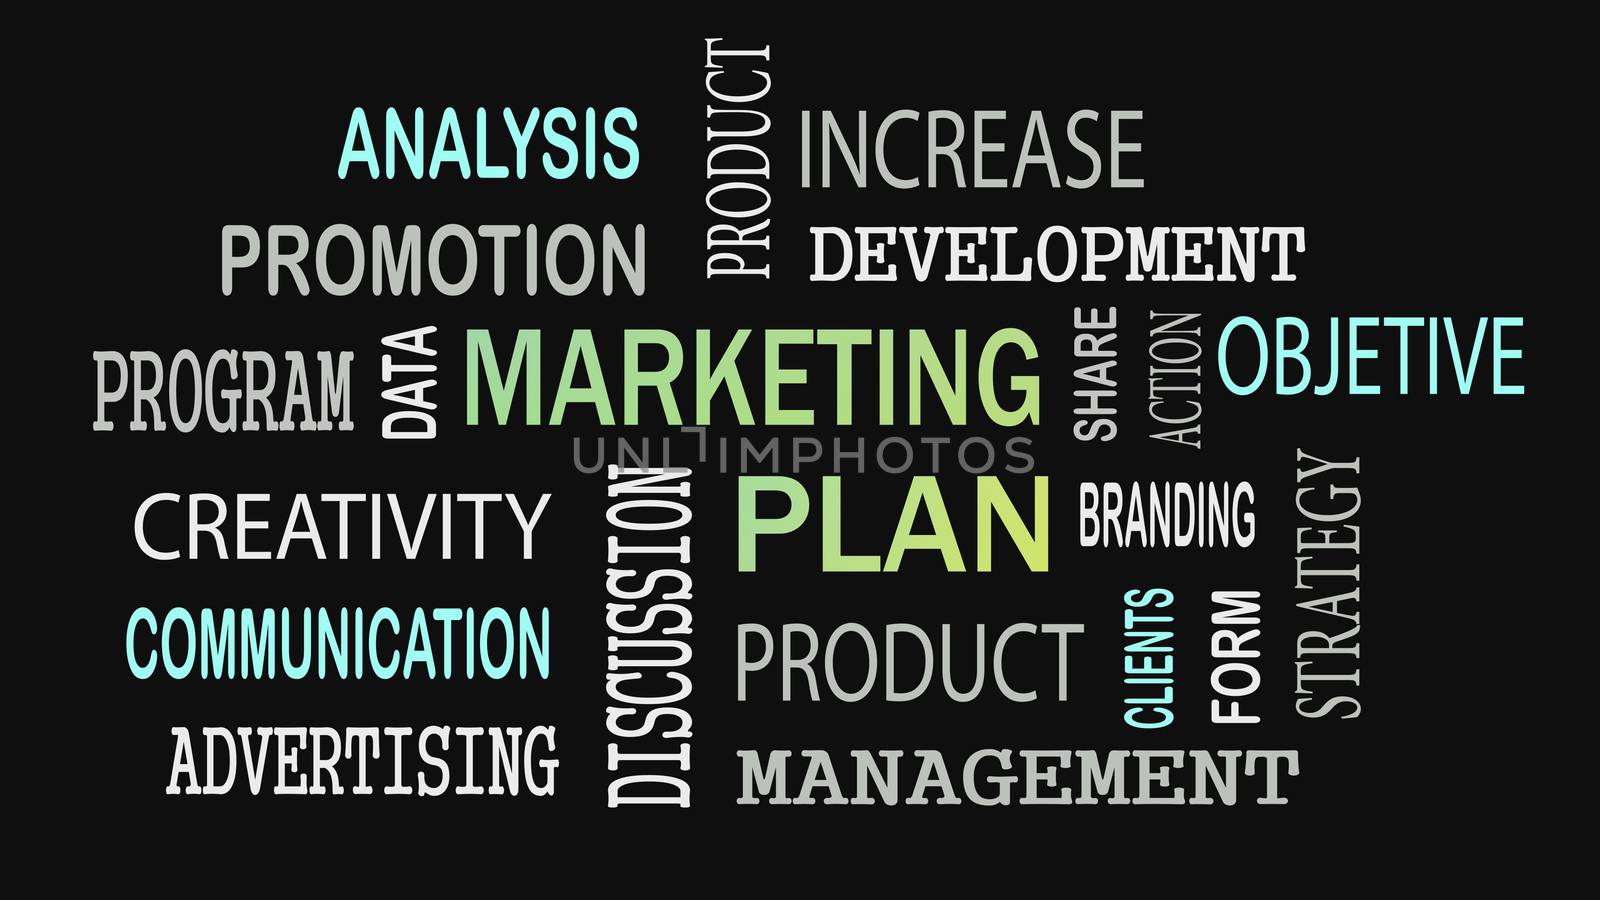 Marketing Plan word cloud concept on black background.